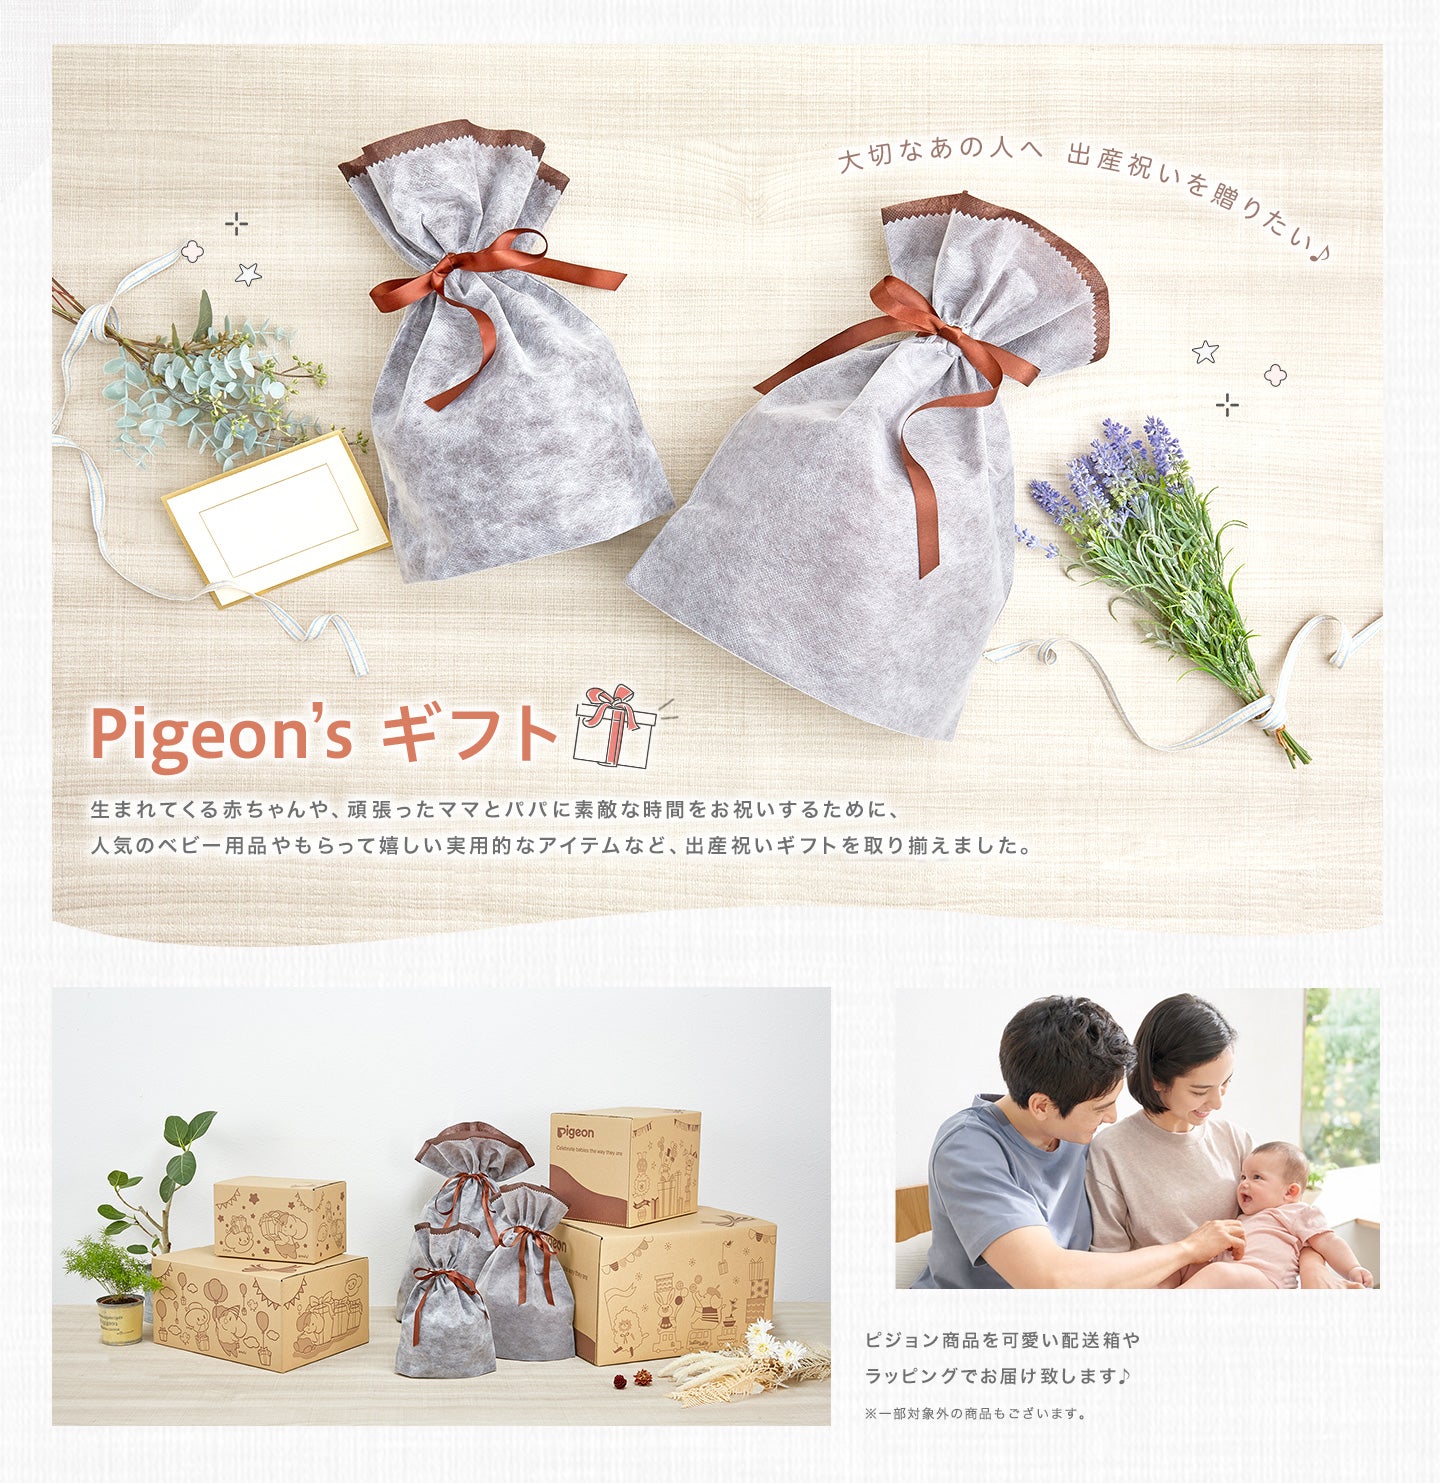 Pigeon’s ギフト